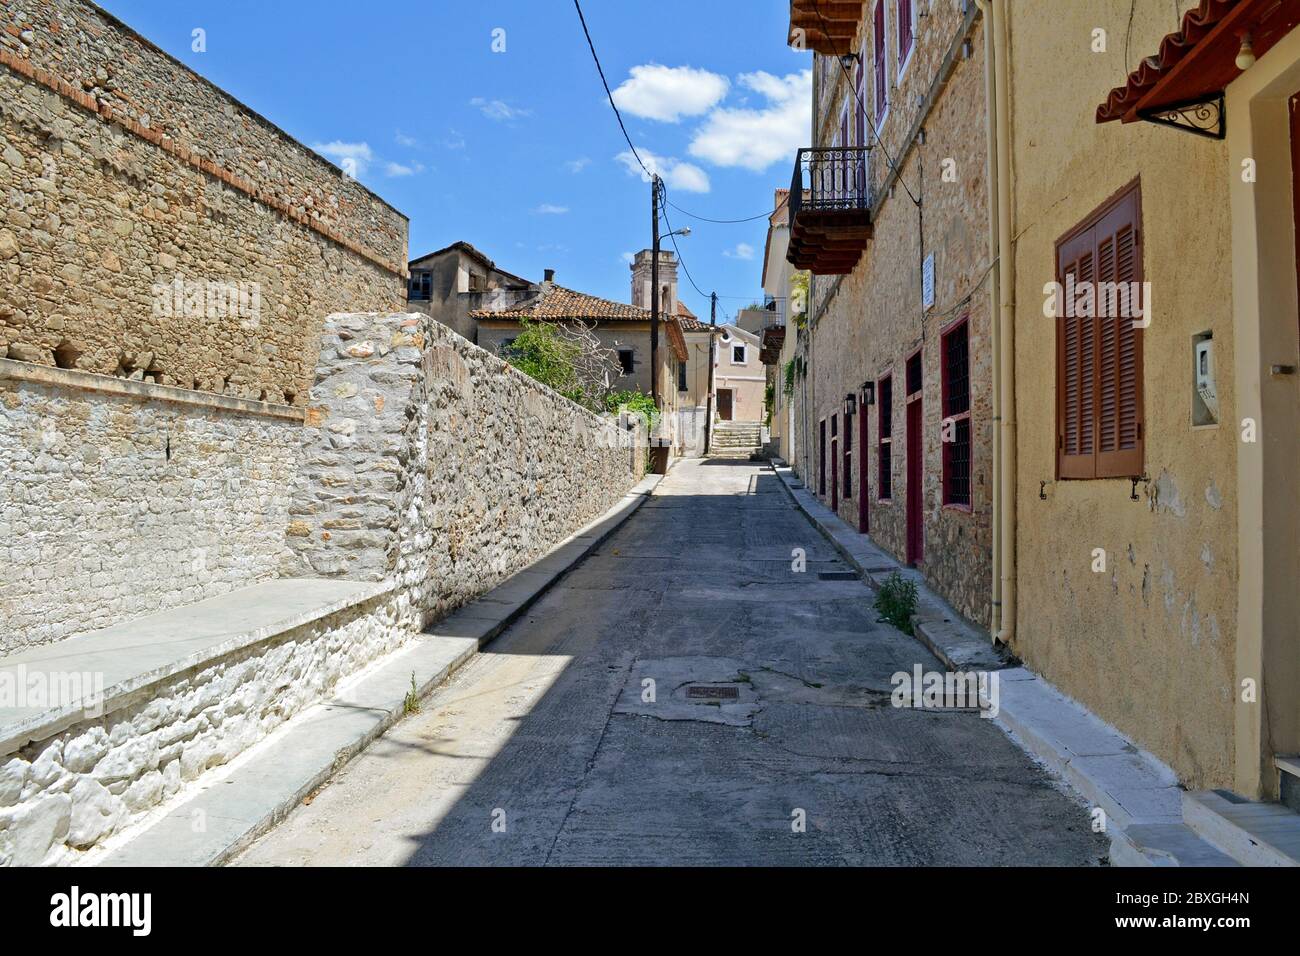 Street in the historical old town of Nafplio, Greece. Stock Photo